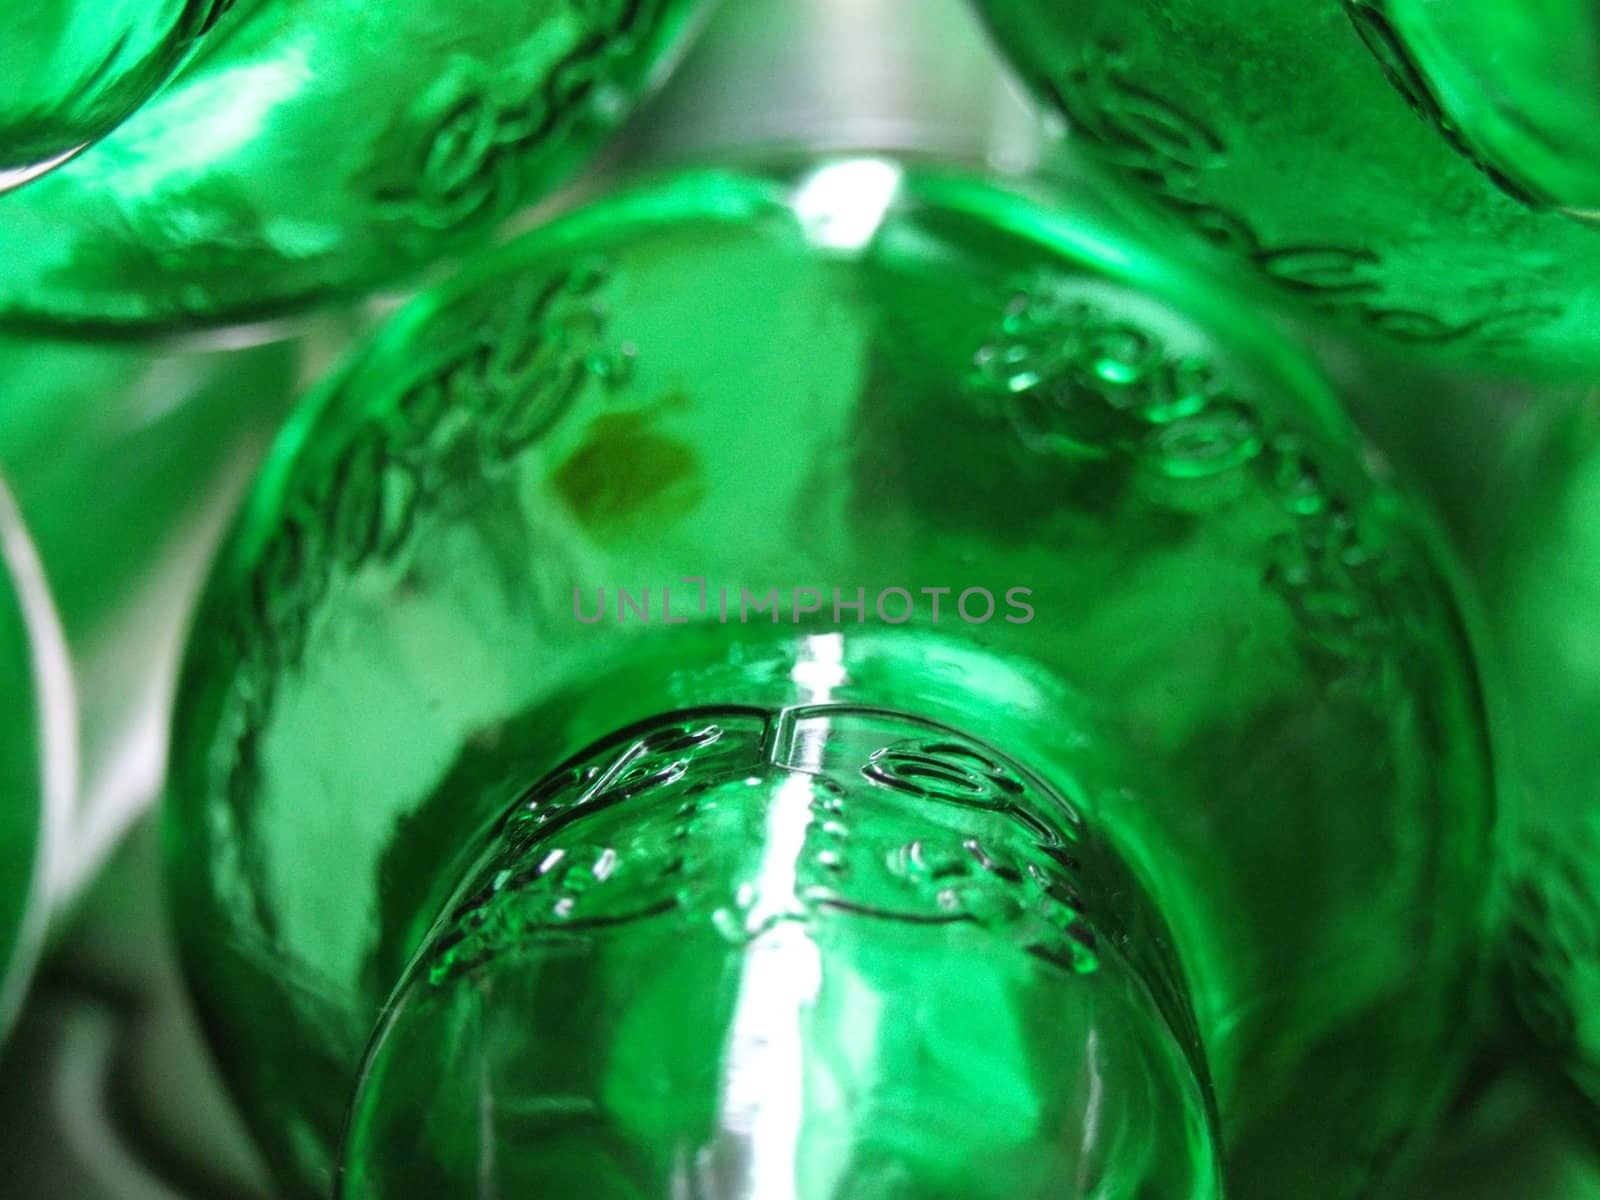 Green Glass Bottles Abstract by steveabcuk